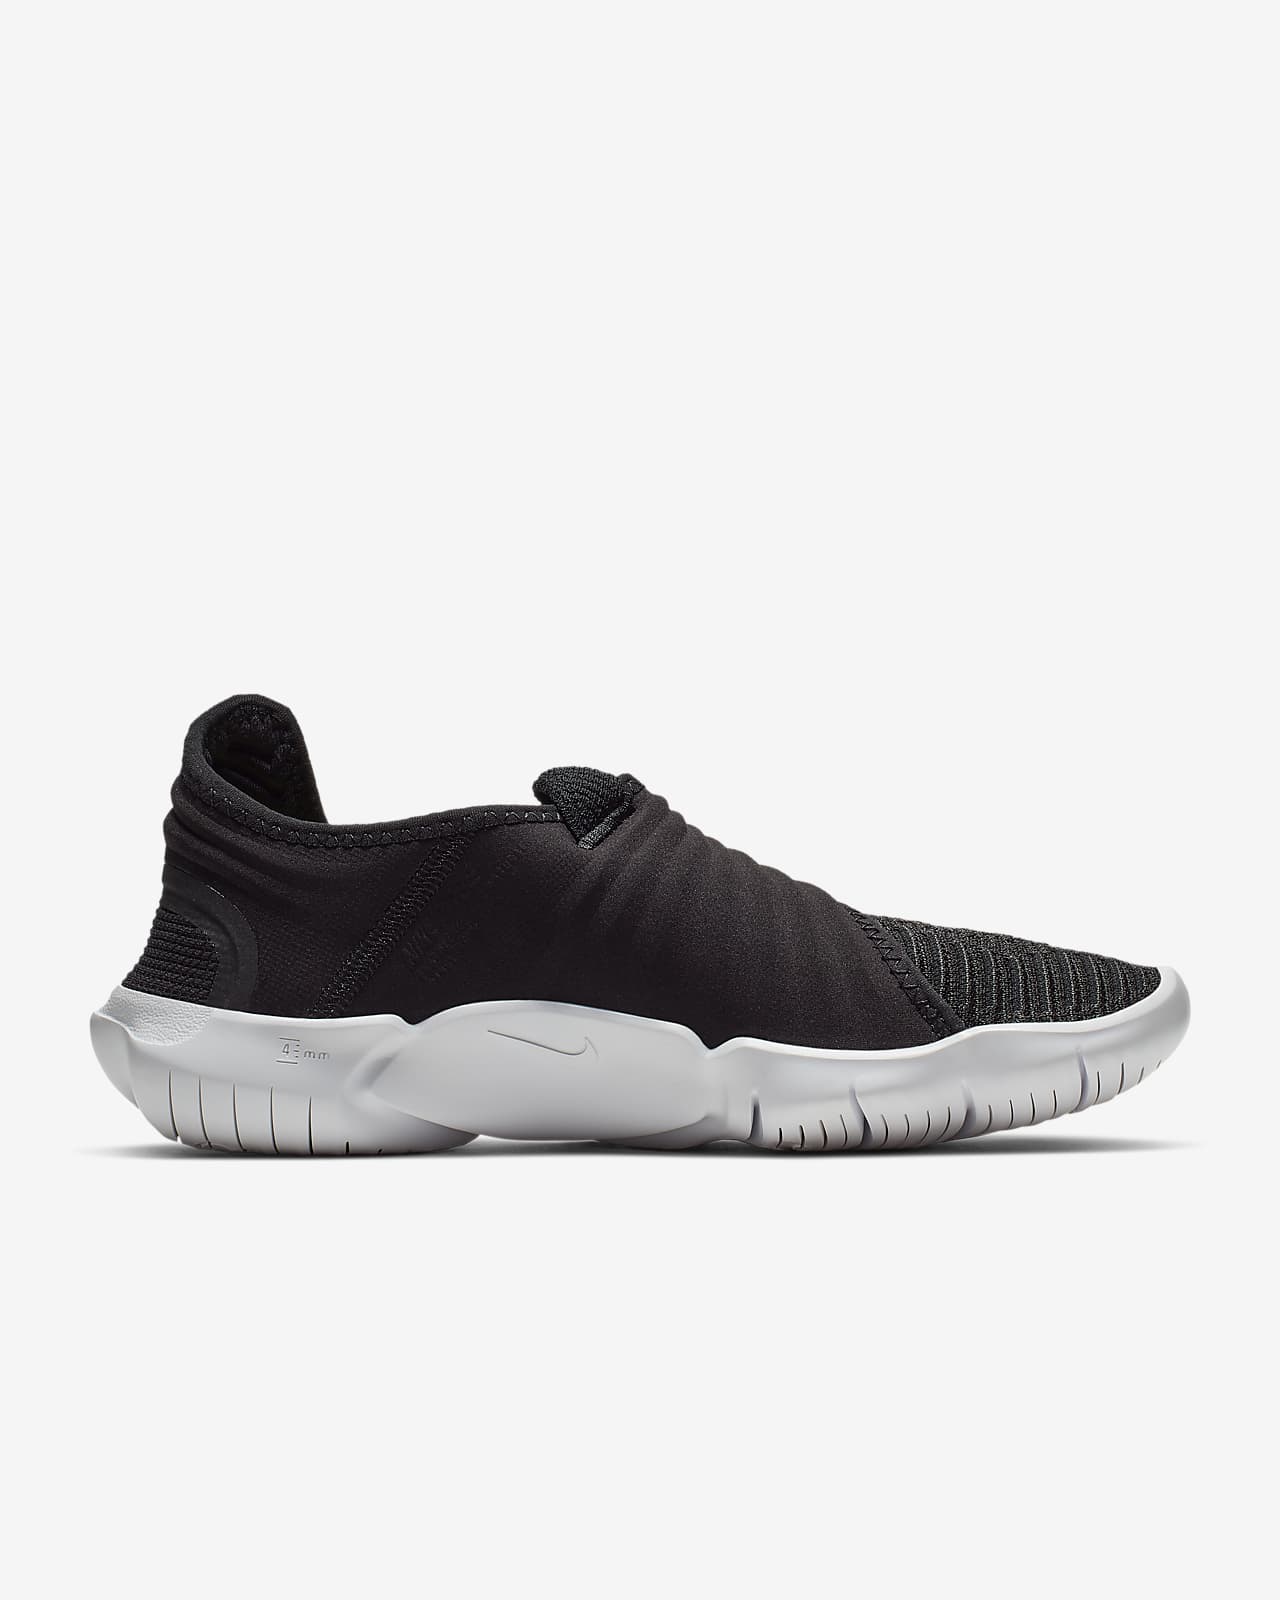 nike free flyknit black and white womens